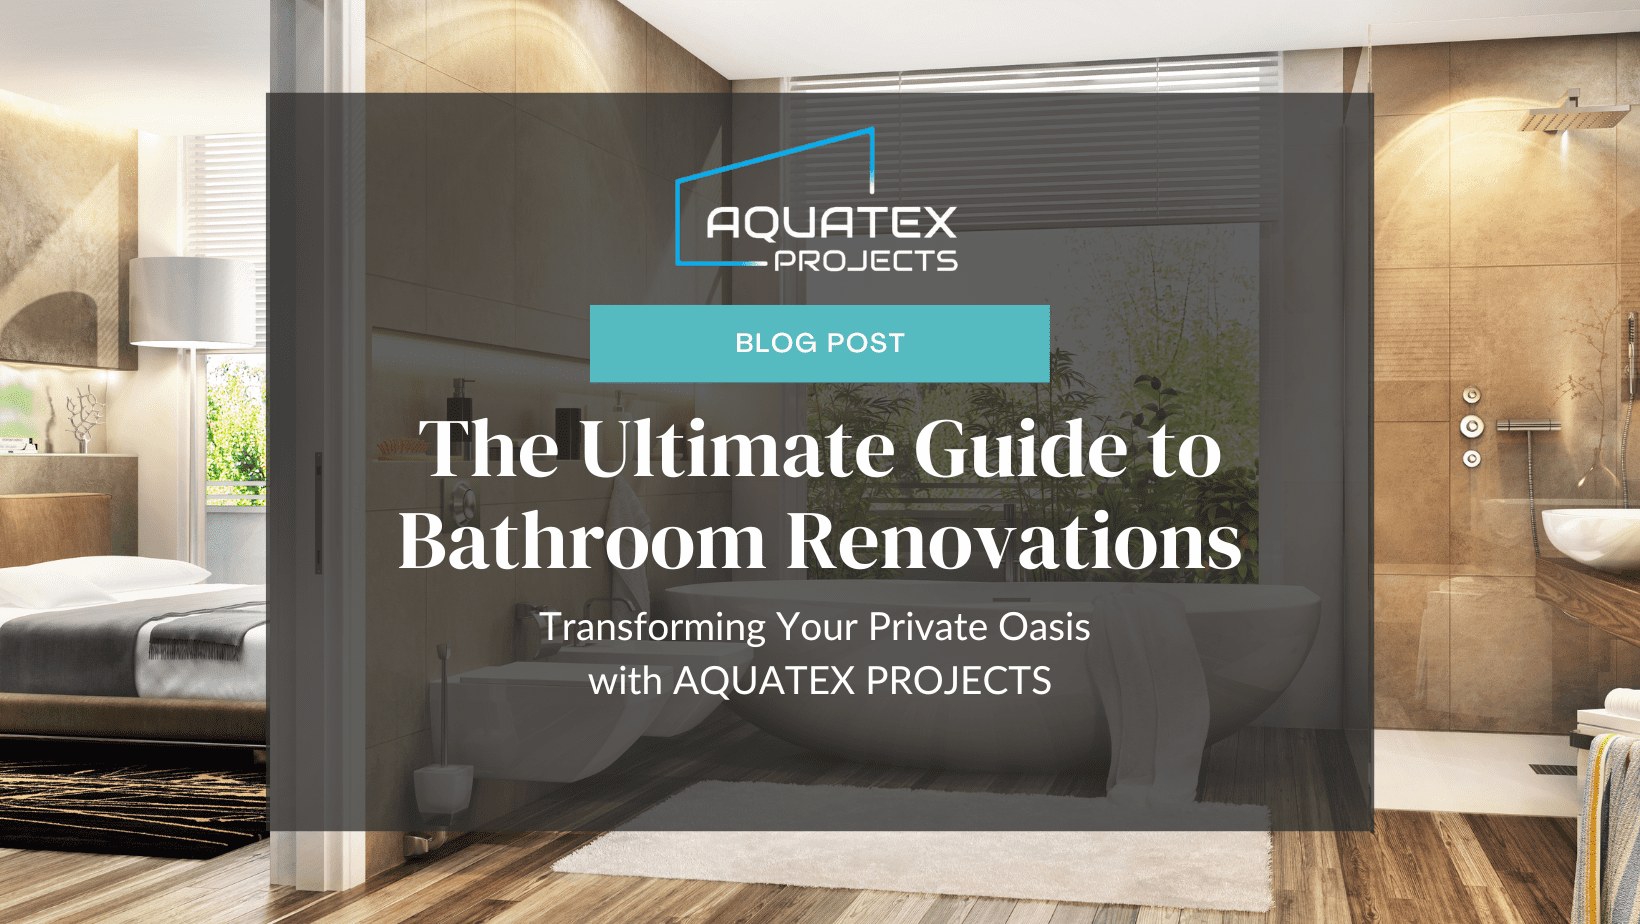 The Ultimate Guide to Bathroom Renovations: Transforming Your Private Oasis with AQUATEX PROJECTS